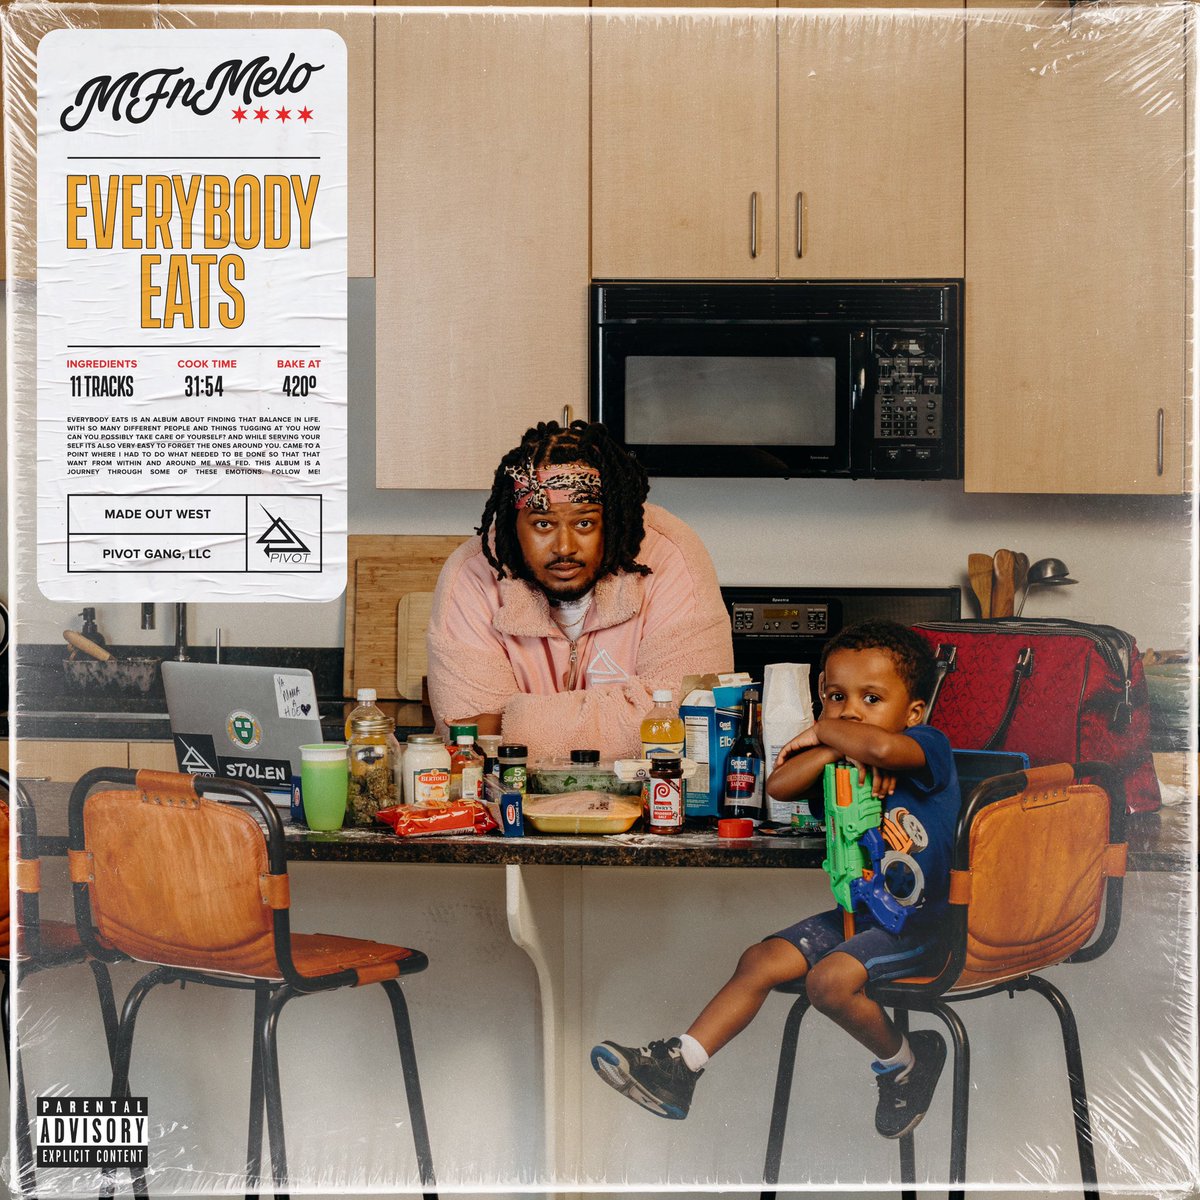 4. Everybody Eats - MFnMeloThis album is damn near perfect from start to finish, Melo dropped this right around Thanksgiving and I don’t think I’ve gone more than a couple days in a row without revisiting since then. Listen to New York, What A Life, and Flow Seats!